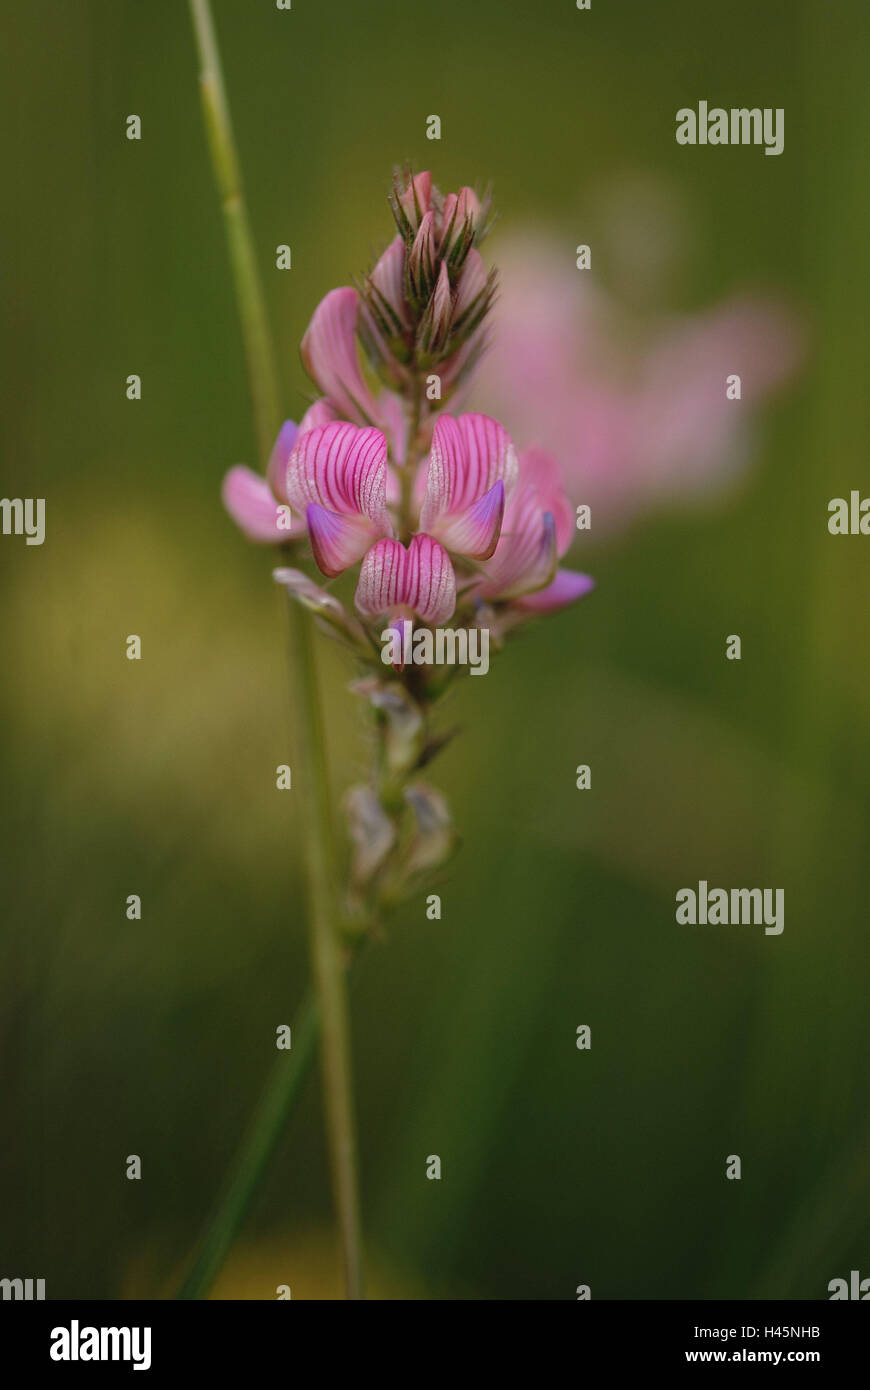 Esparsette, blossom, detail, Saat-Esparsette, Onobrychis, flower, flower stand, Faboideae, pink, nature, thin turf, juniper moor, pointer plant, medium close-up, Stock Photo